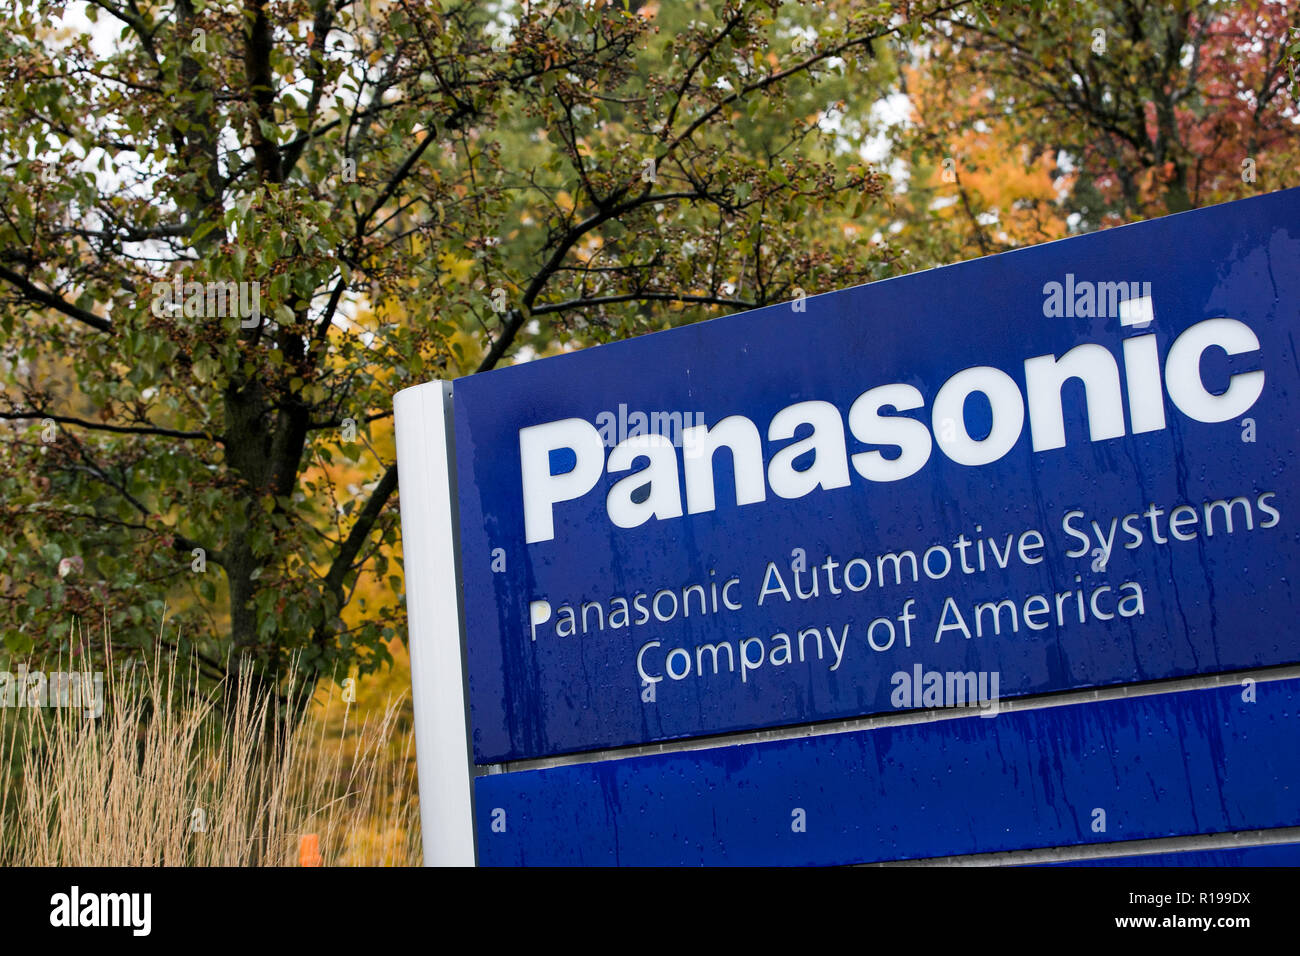 A logo sign outside of a facility occupied by Panasonic Automotive Systems Company of America in Farmington Hills, Michigan, on October 27, 2018. Stock Photo